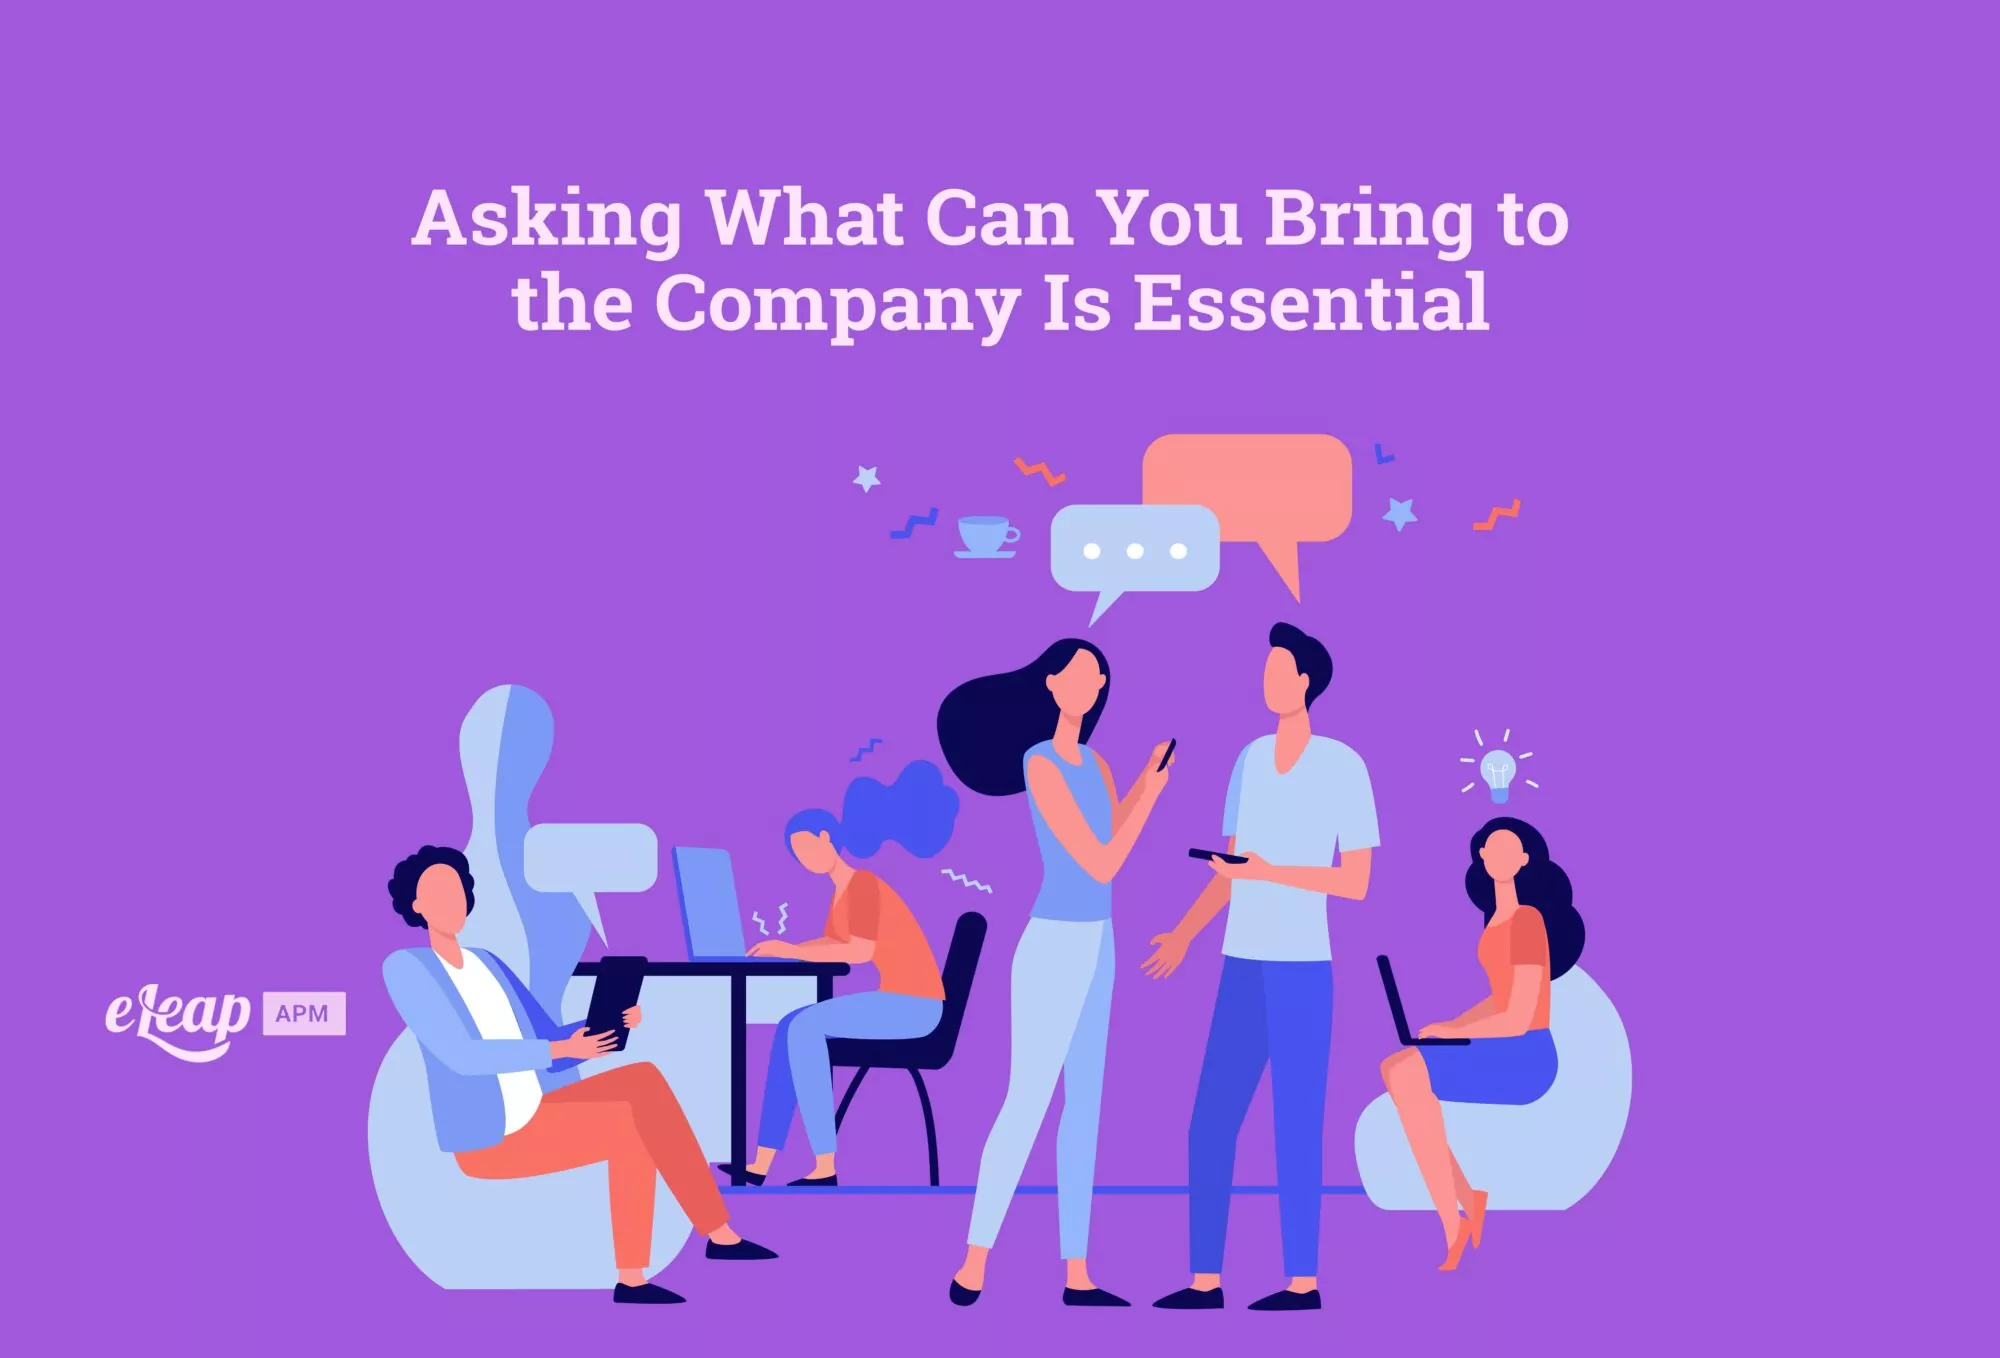 What Can You Bring to the Company